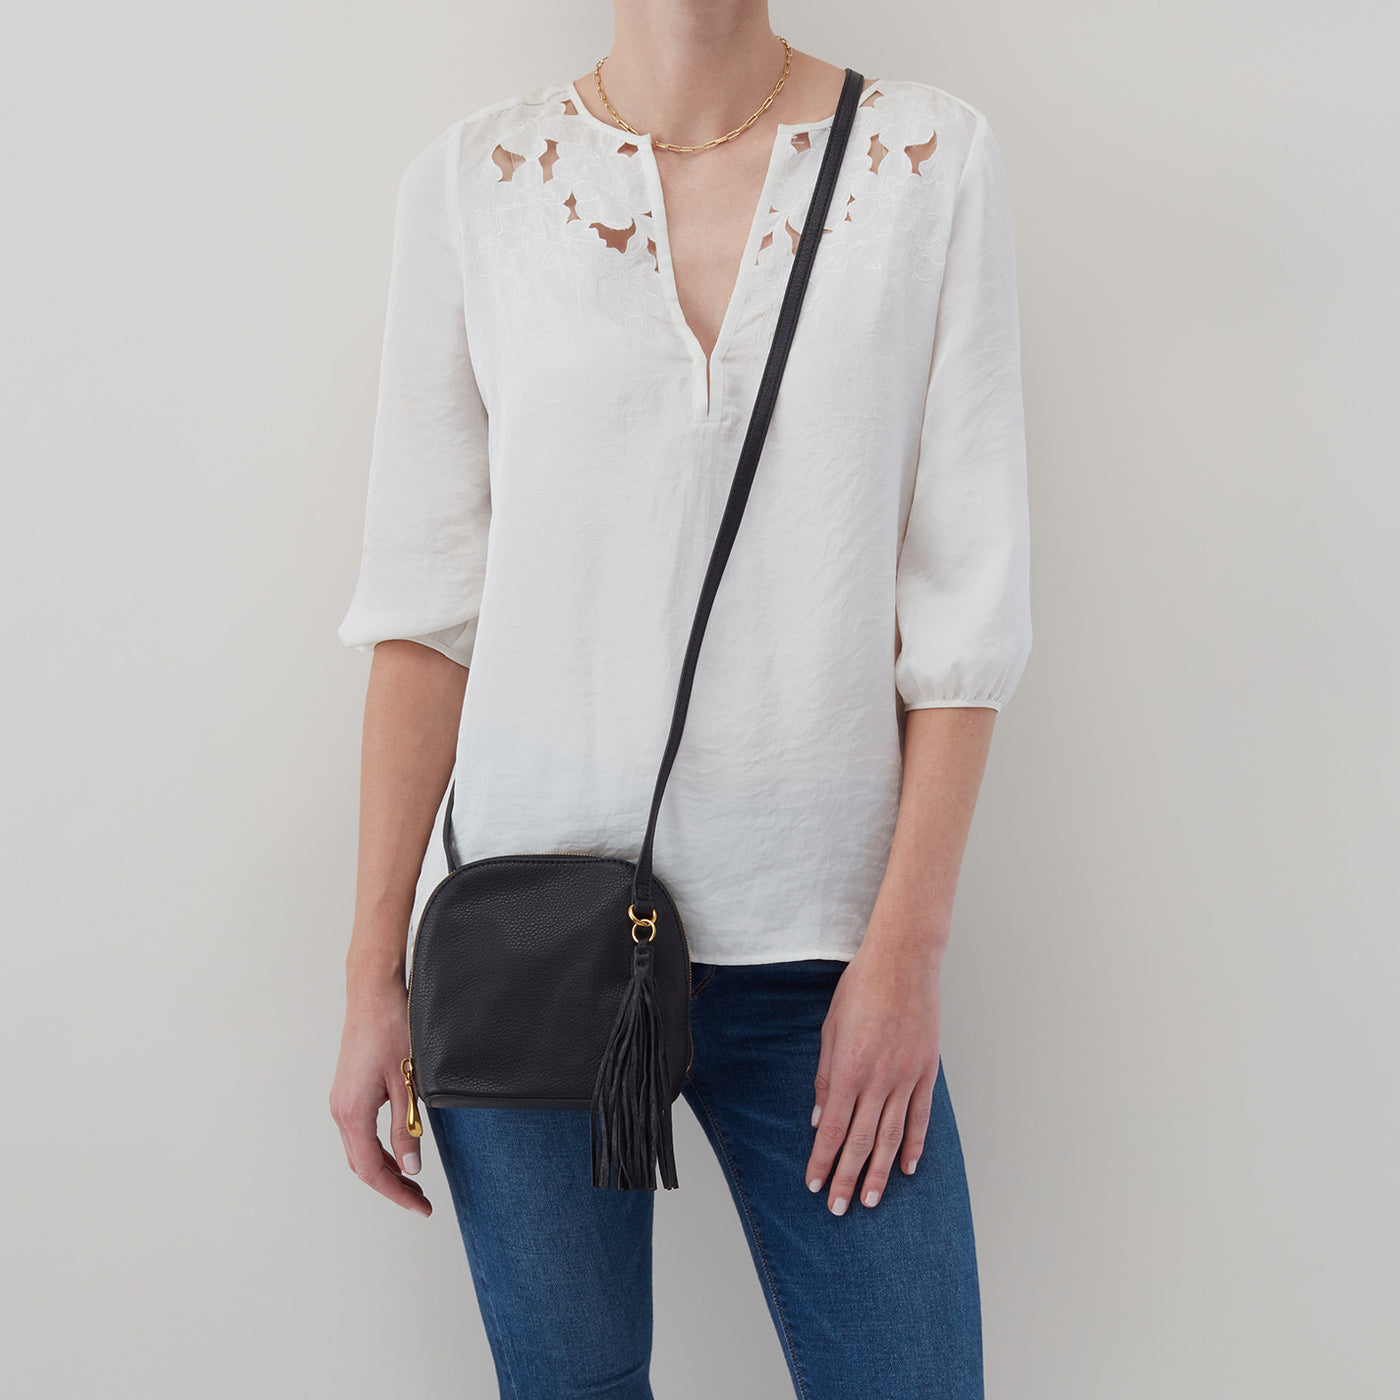 Nash Crossbody in Pebbled Leather - White